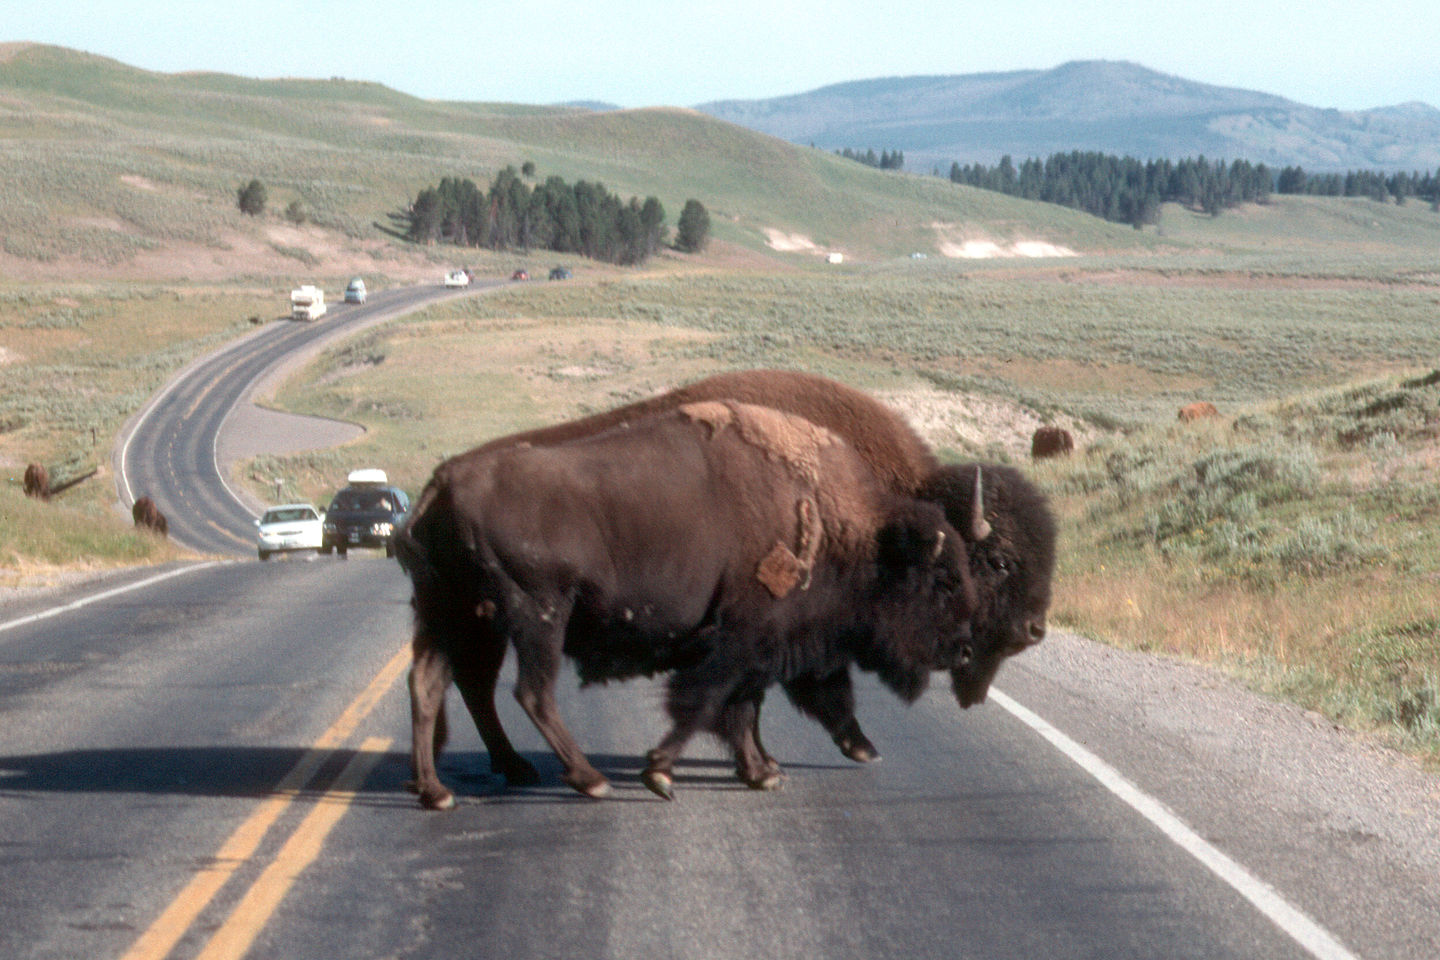 Why does the Bison cross the road?